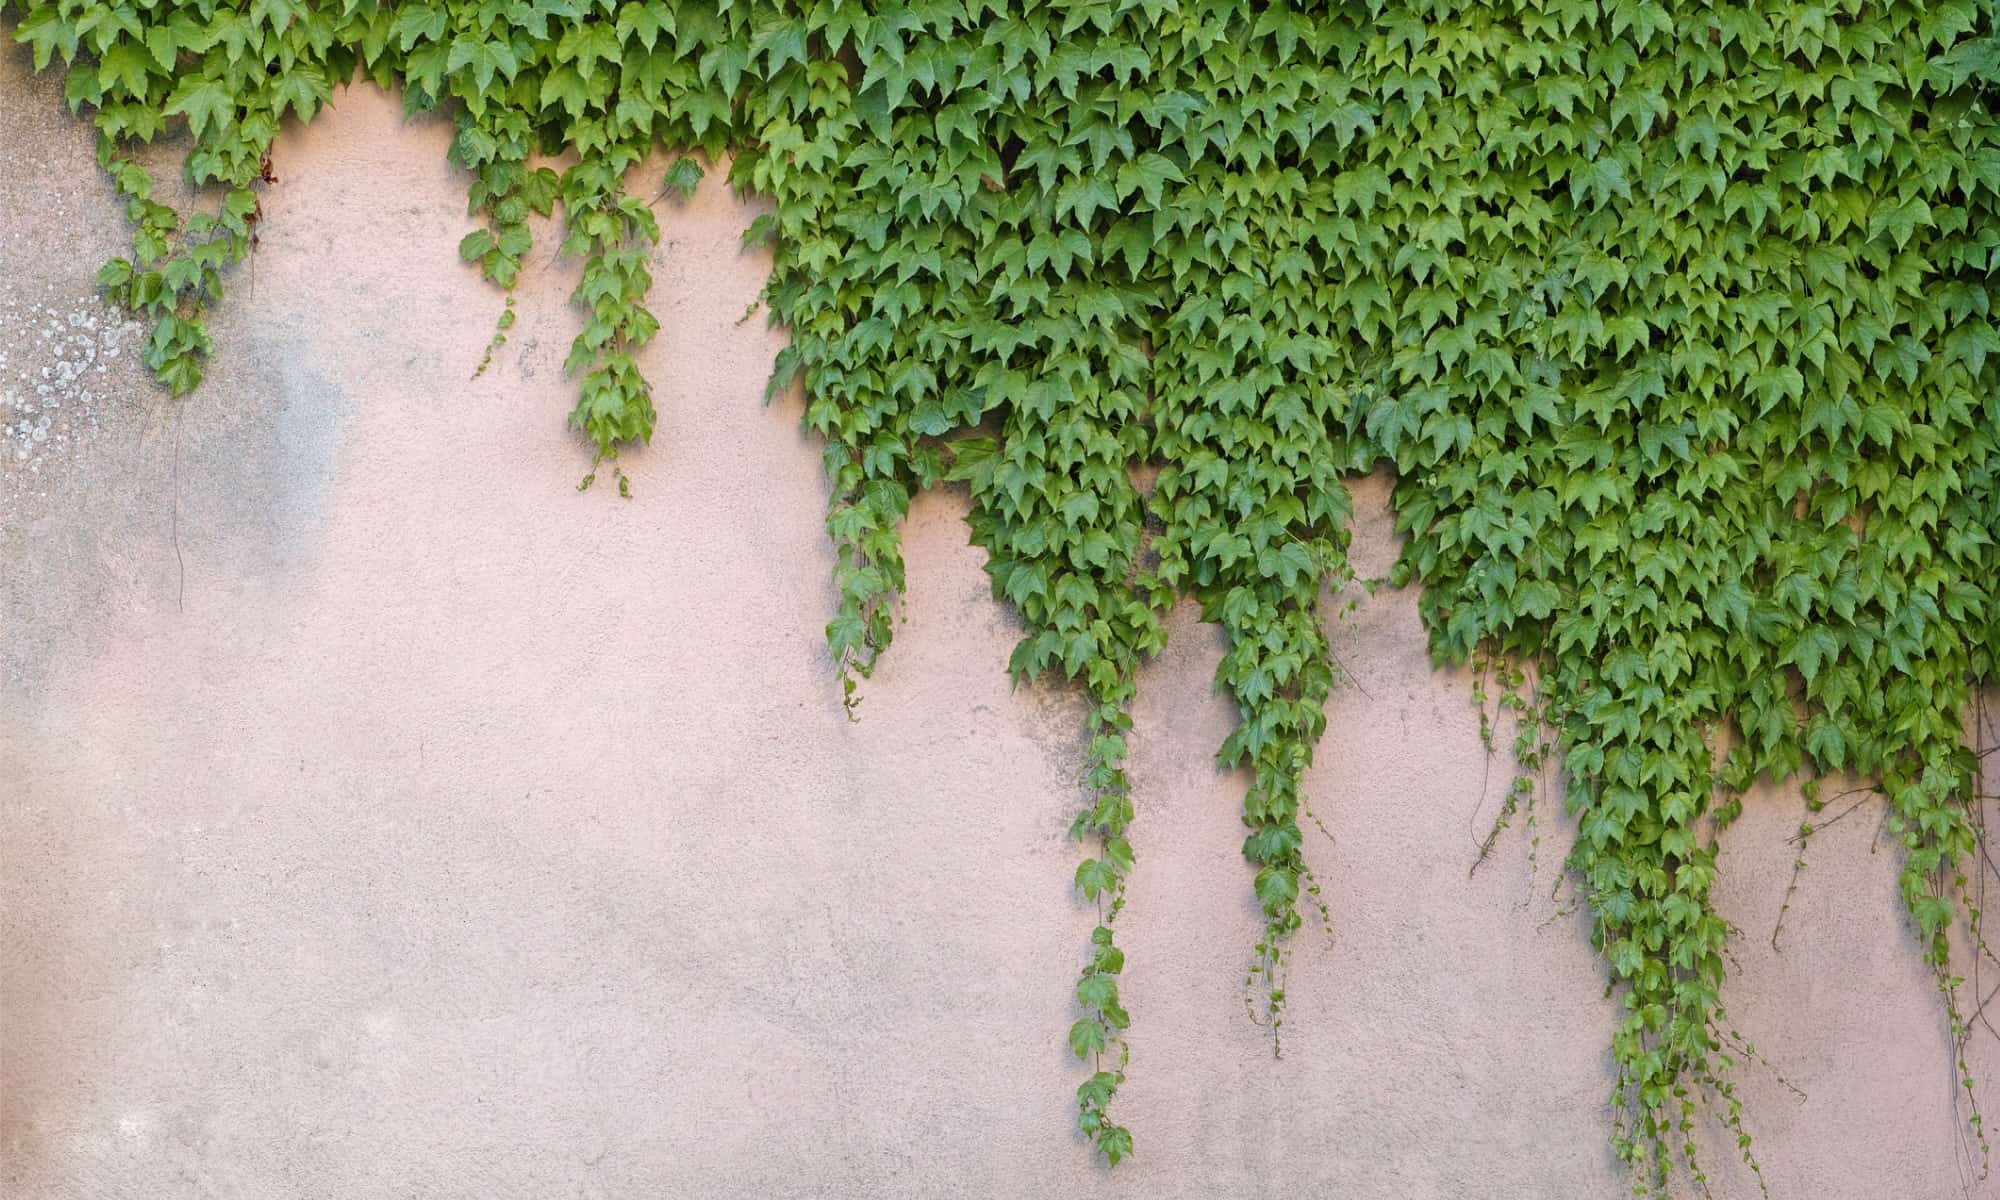 boston ivy creeping down what appears to be a light peach stucco wall